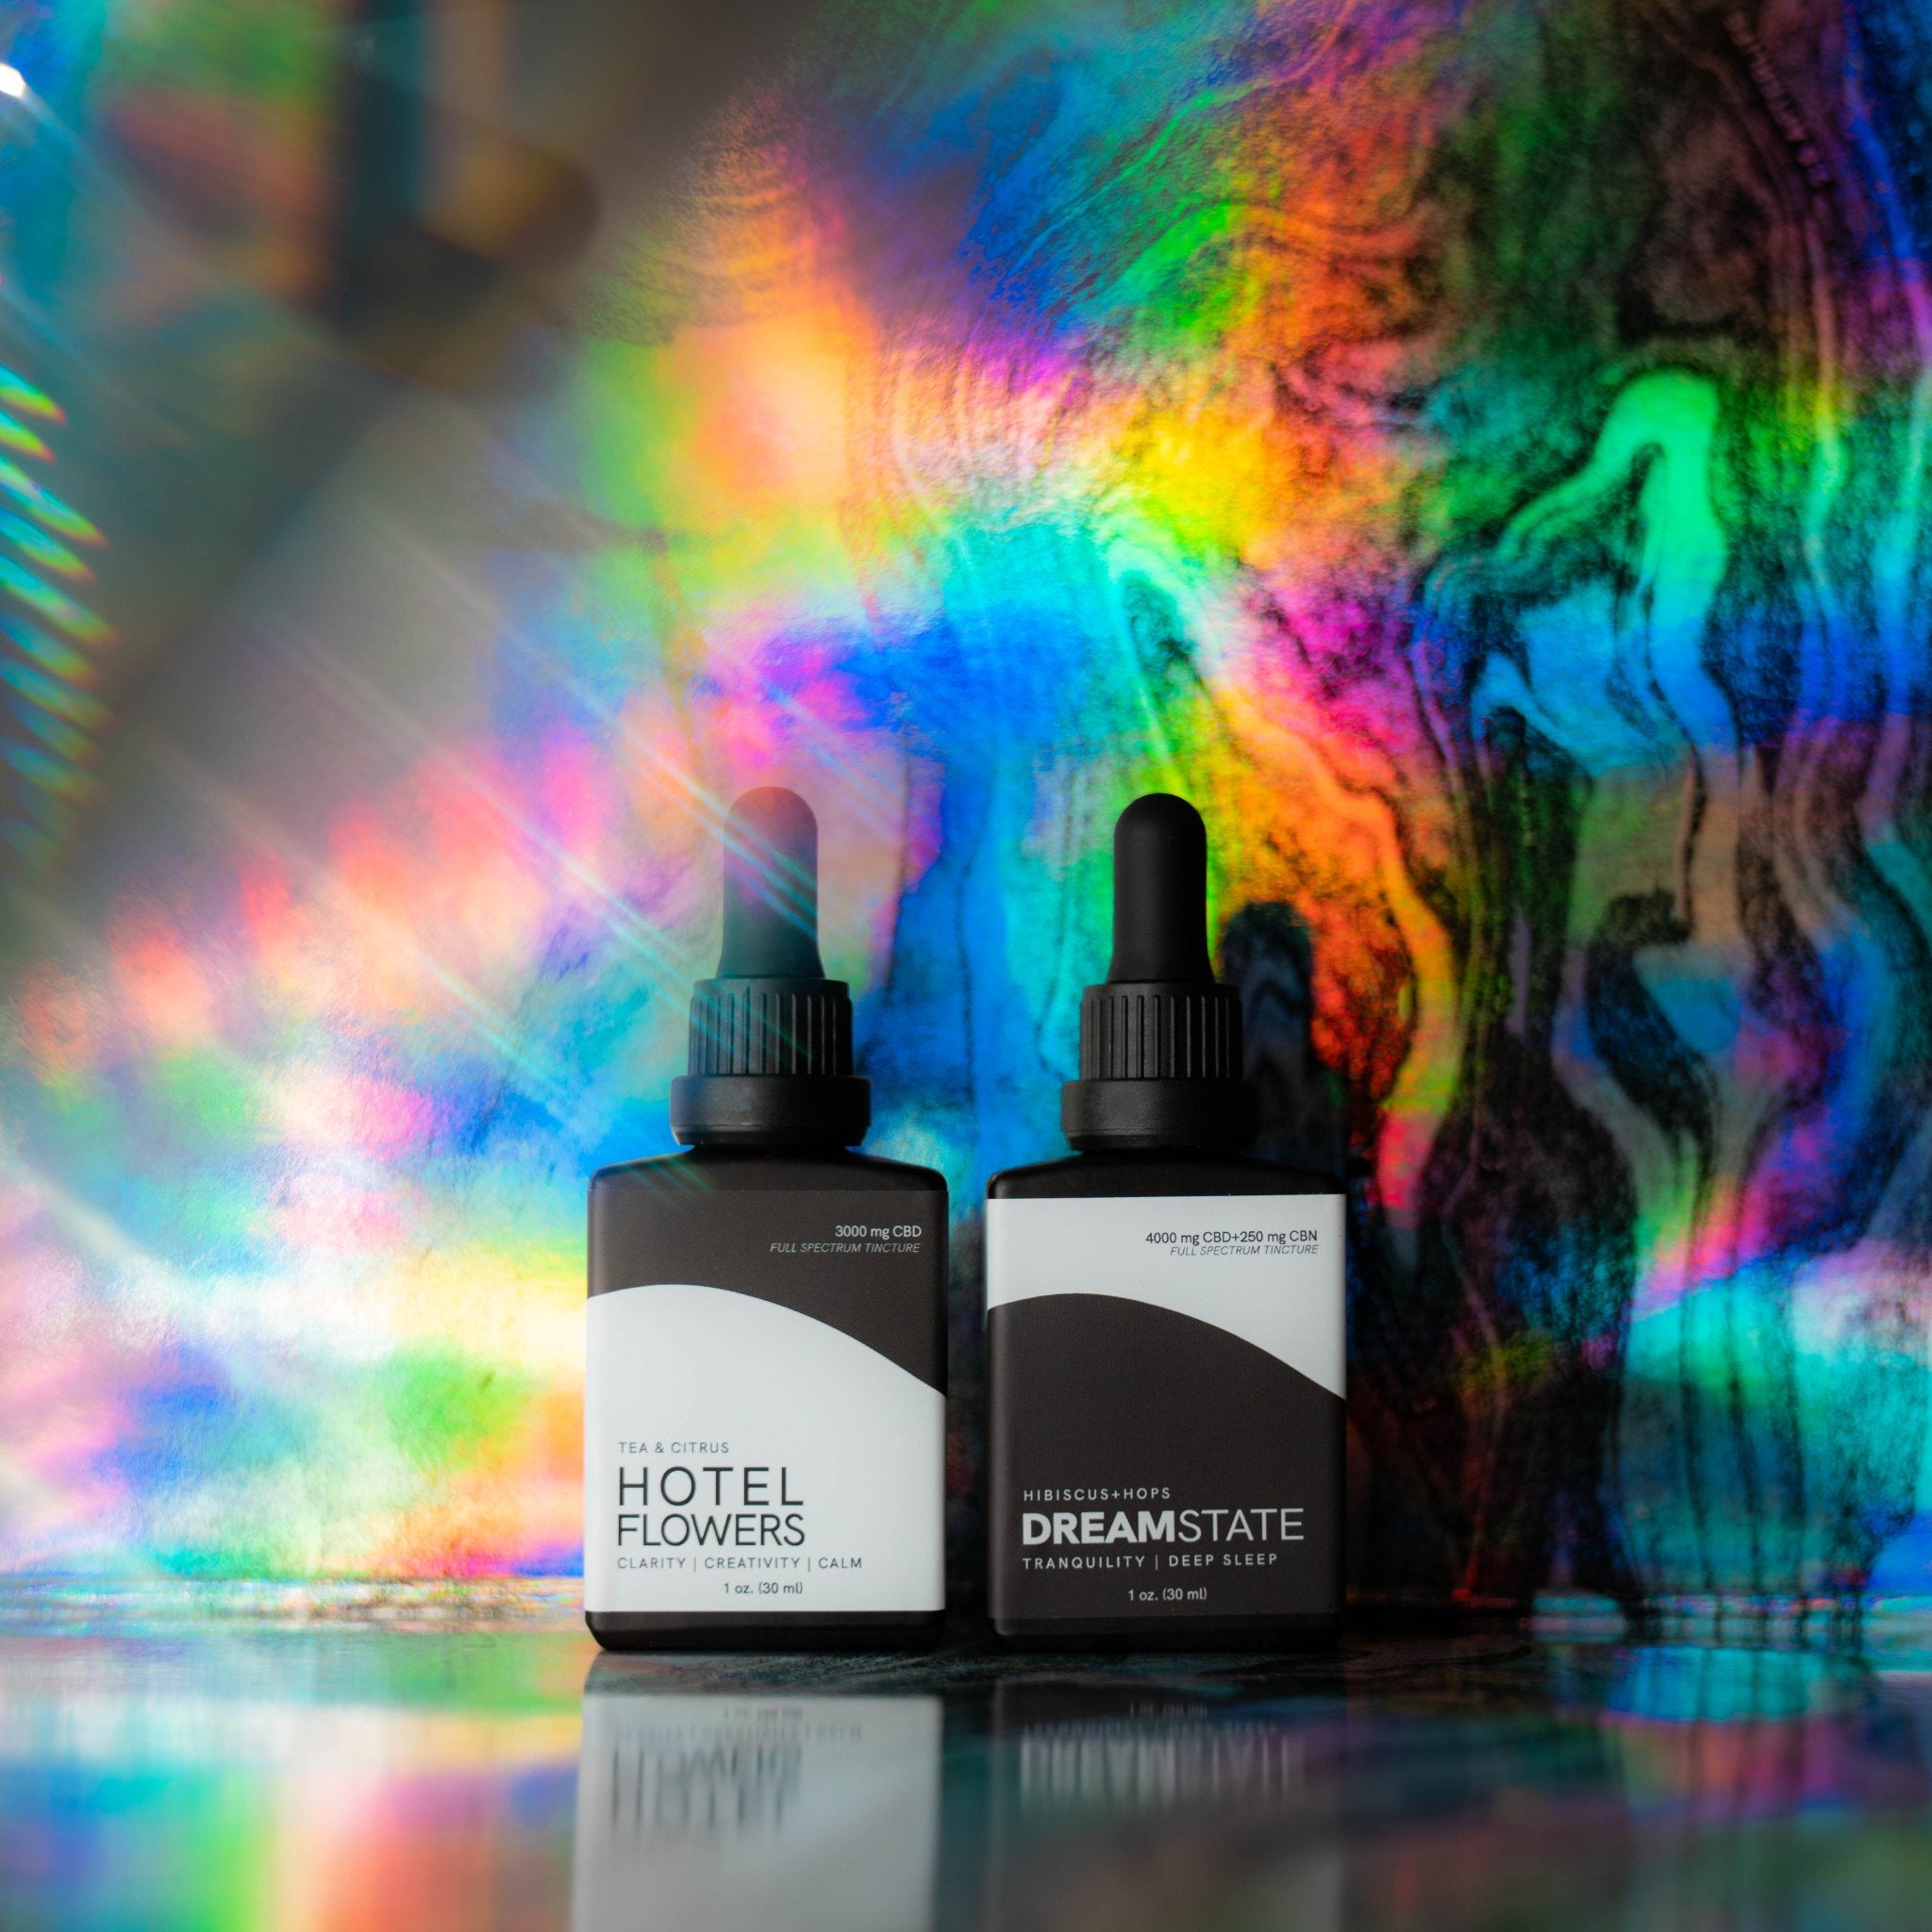 hotel flowers and dream state tinctures in front of colorful background with cool light effects